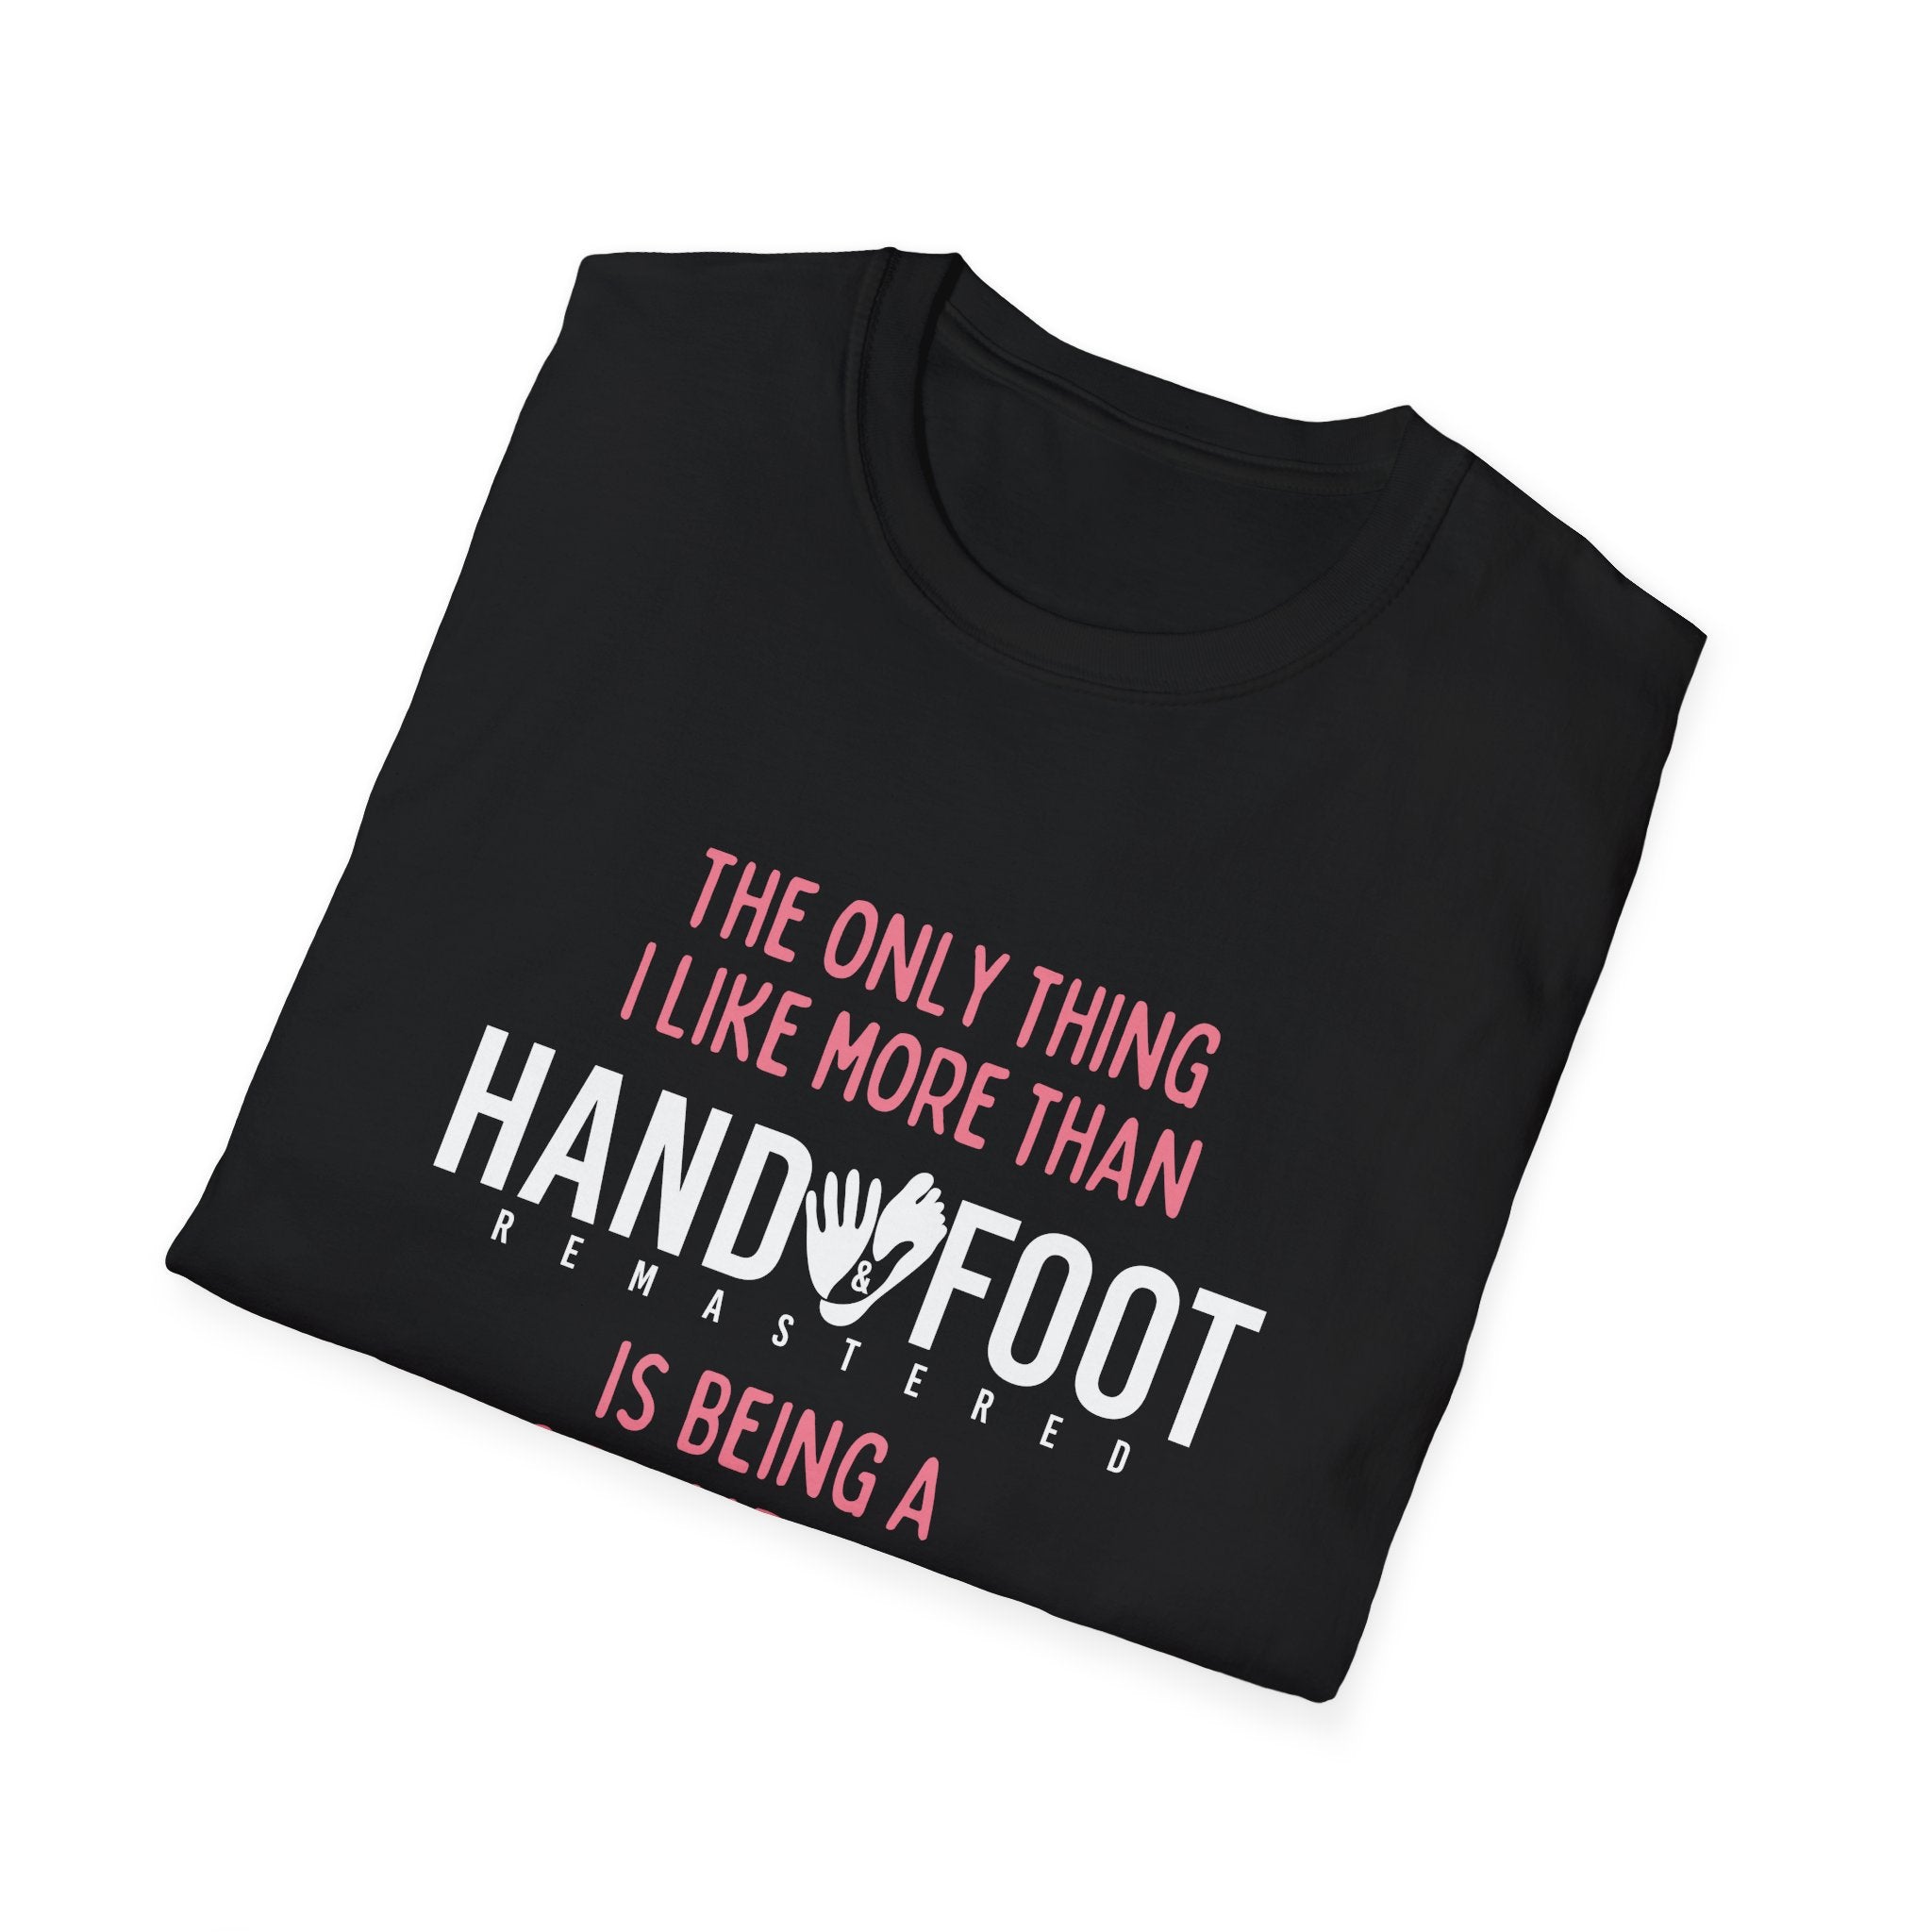 Being a Grandmom Softstyle T-Shirt